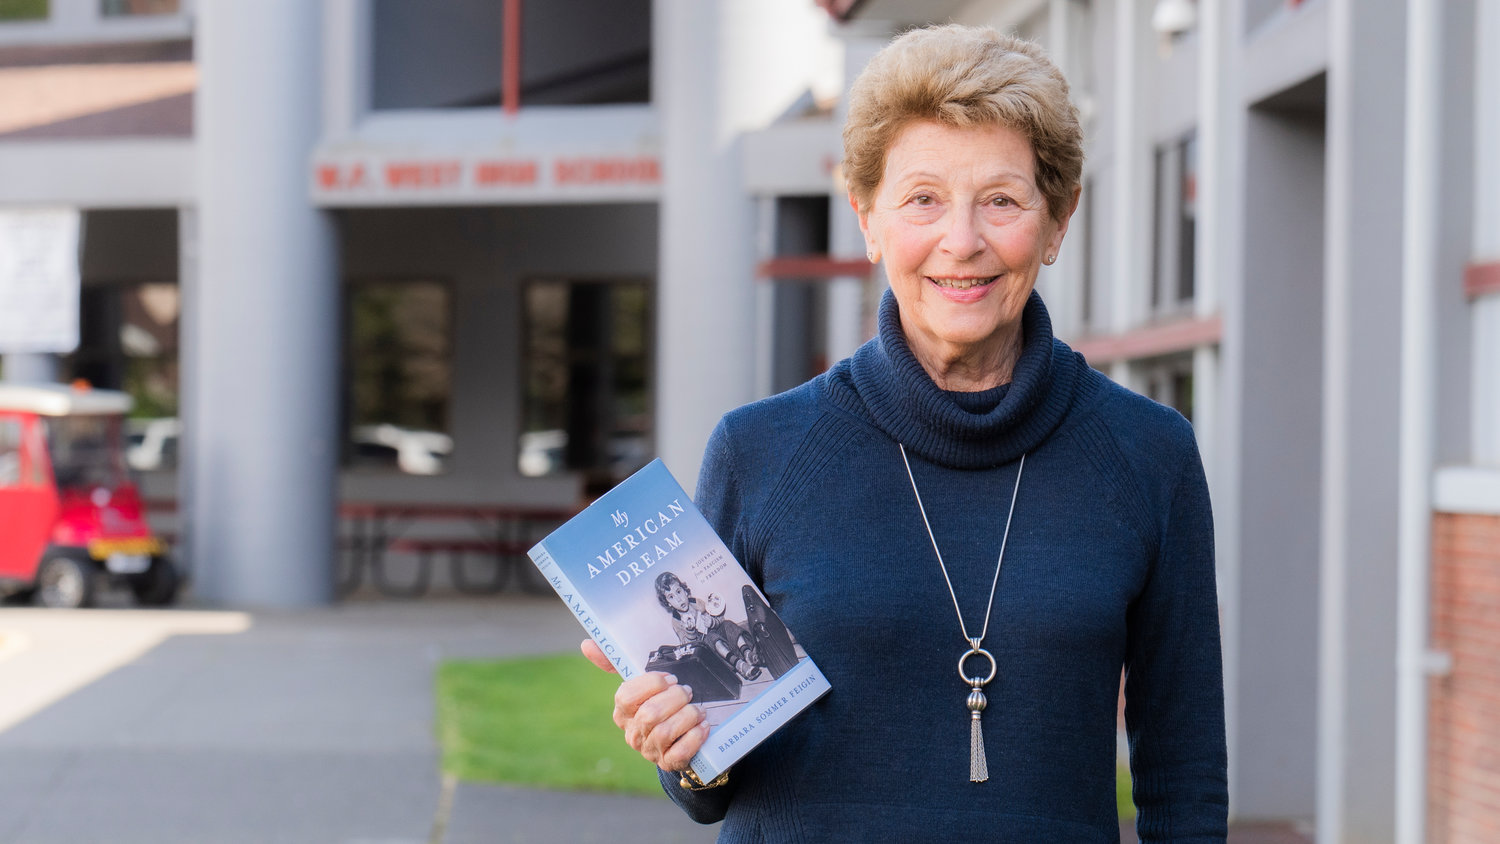 Barbara Sommer Feigin smiles for a photo with her book “My American Dream” while standing outside W.F. West High School  in Chehalis.